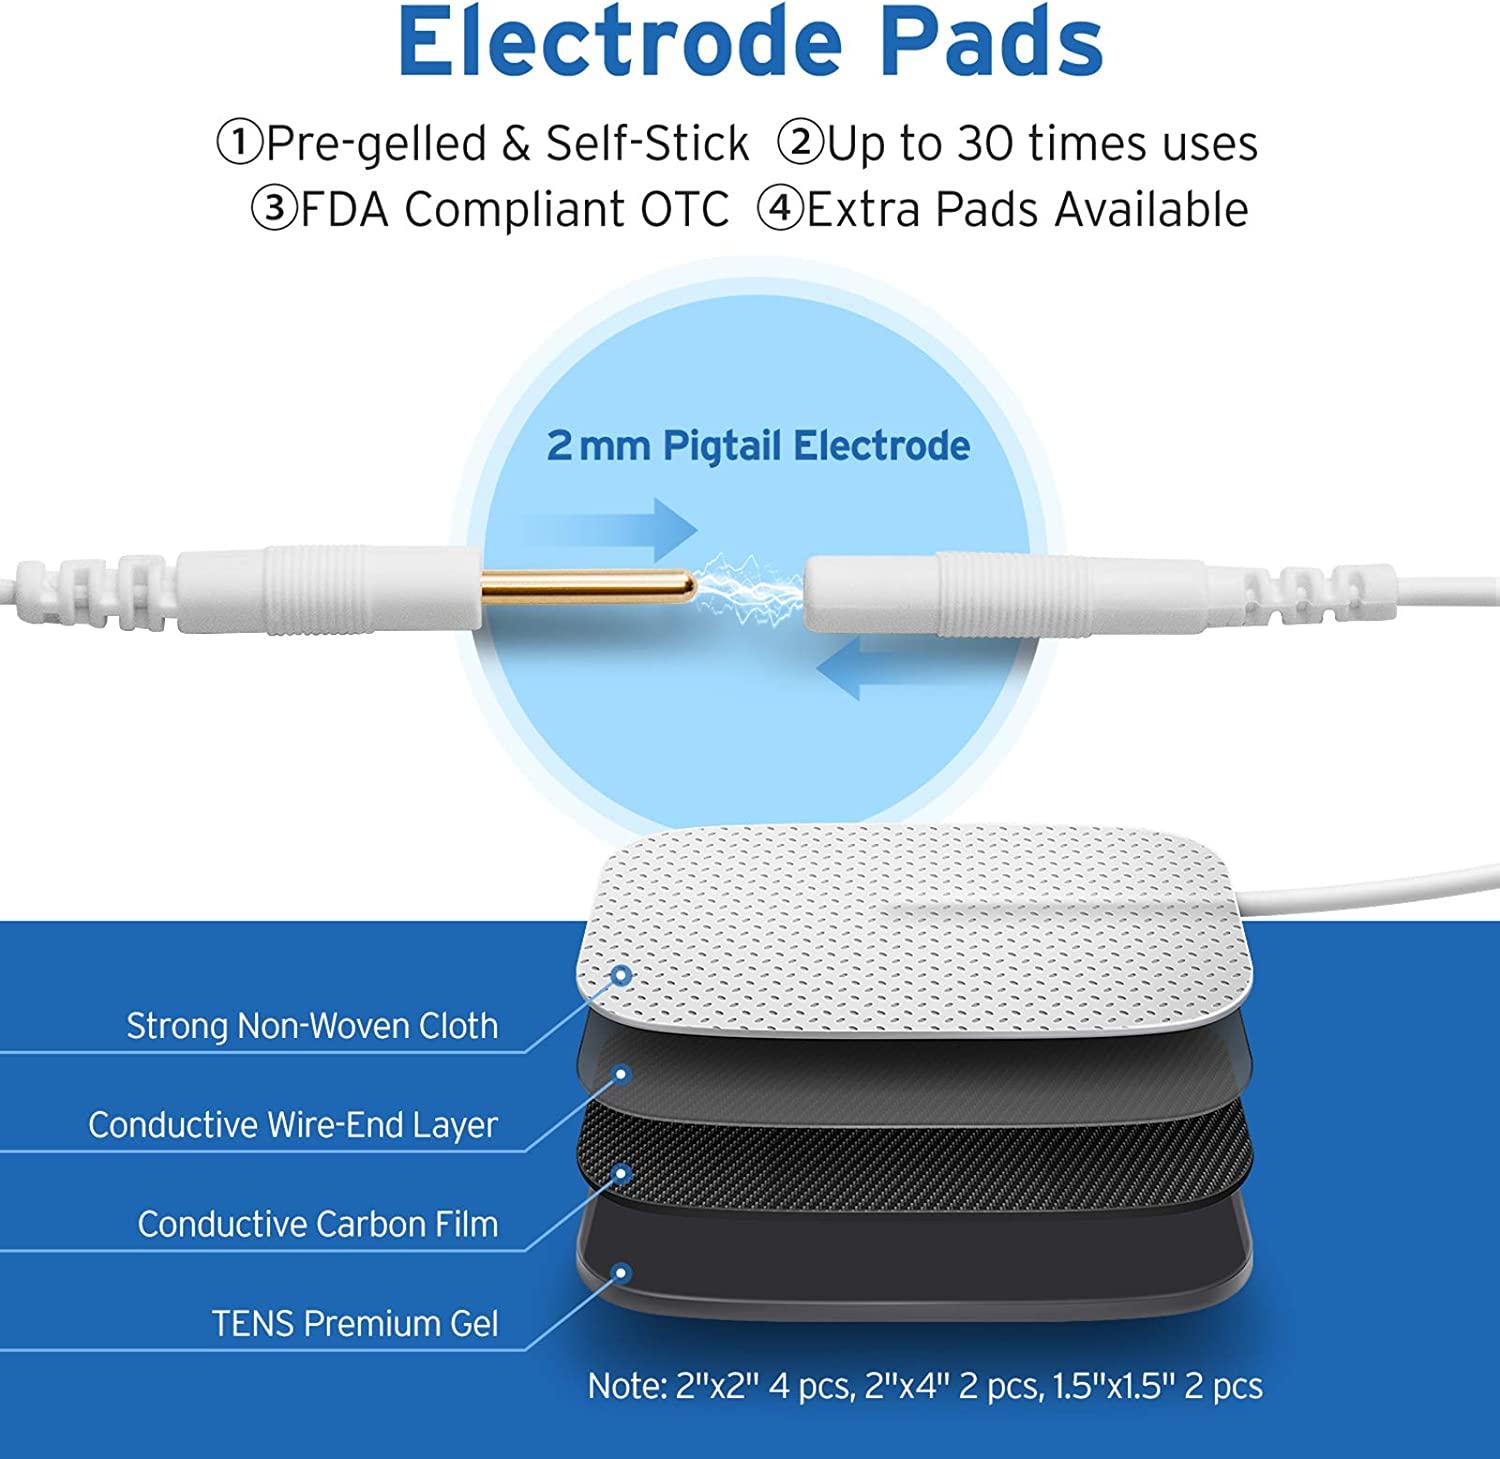 Professional & Affordable Fda Cleared, Fsa Eligible Tens Unit For